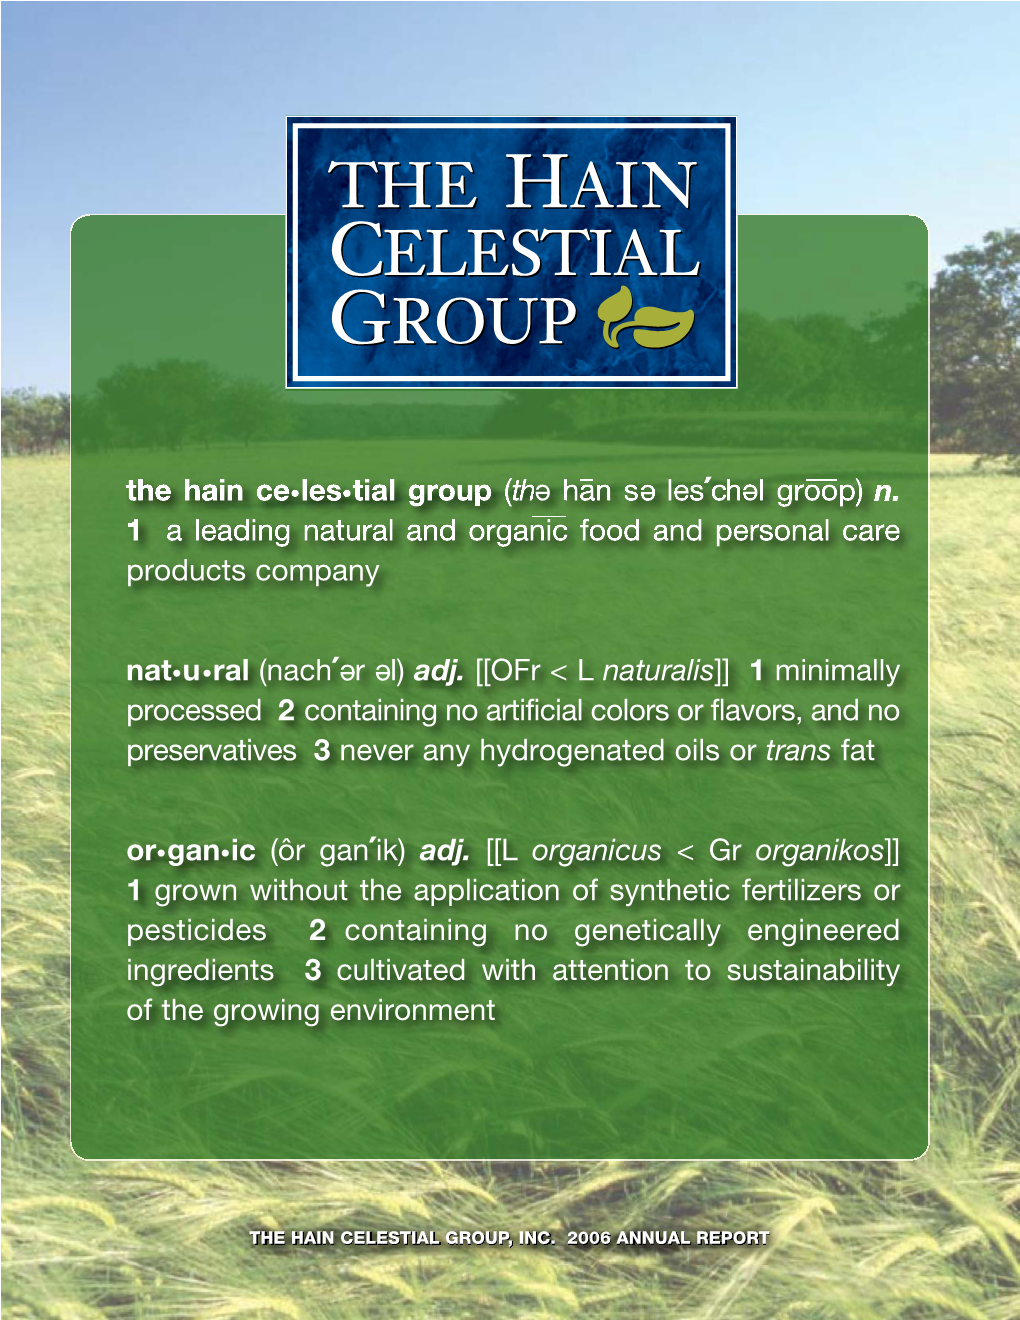 THE HAIN CELESTIAL GROUP, INC. 2006 ANNUAL REPORT Our Company